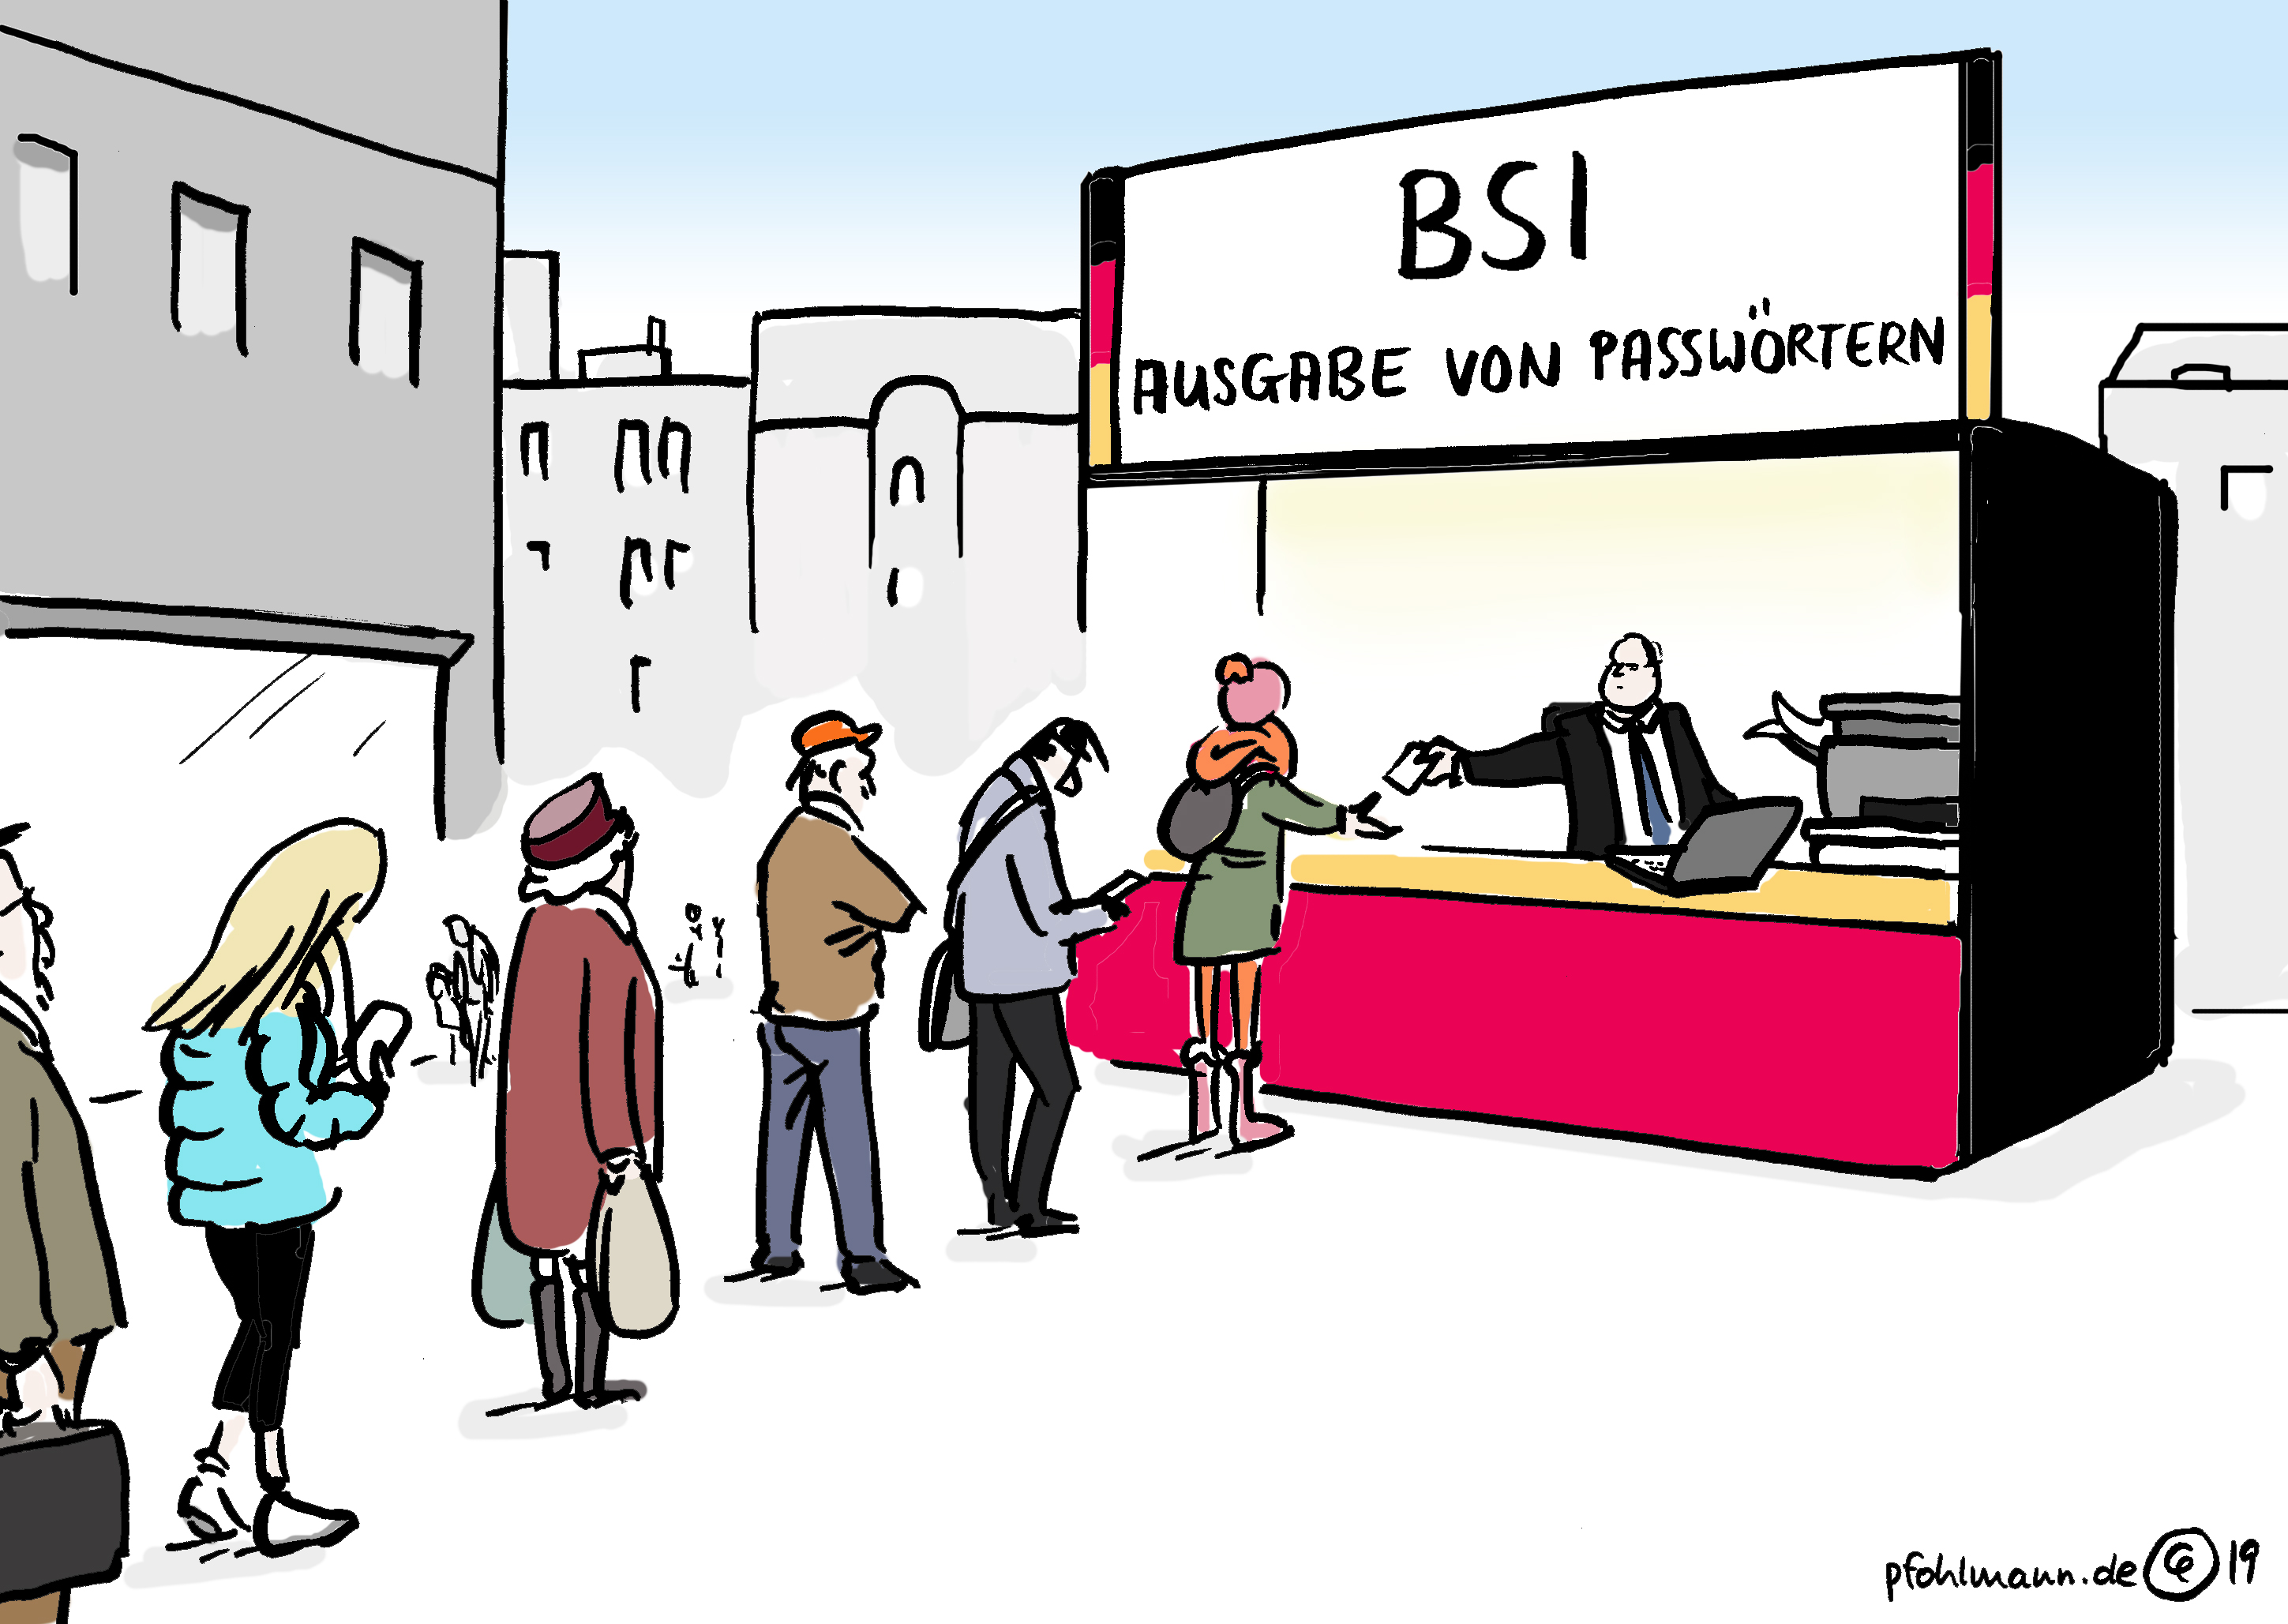 Comic: Citizens pick up their passwords at a BSI booth